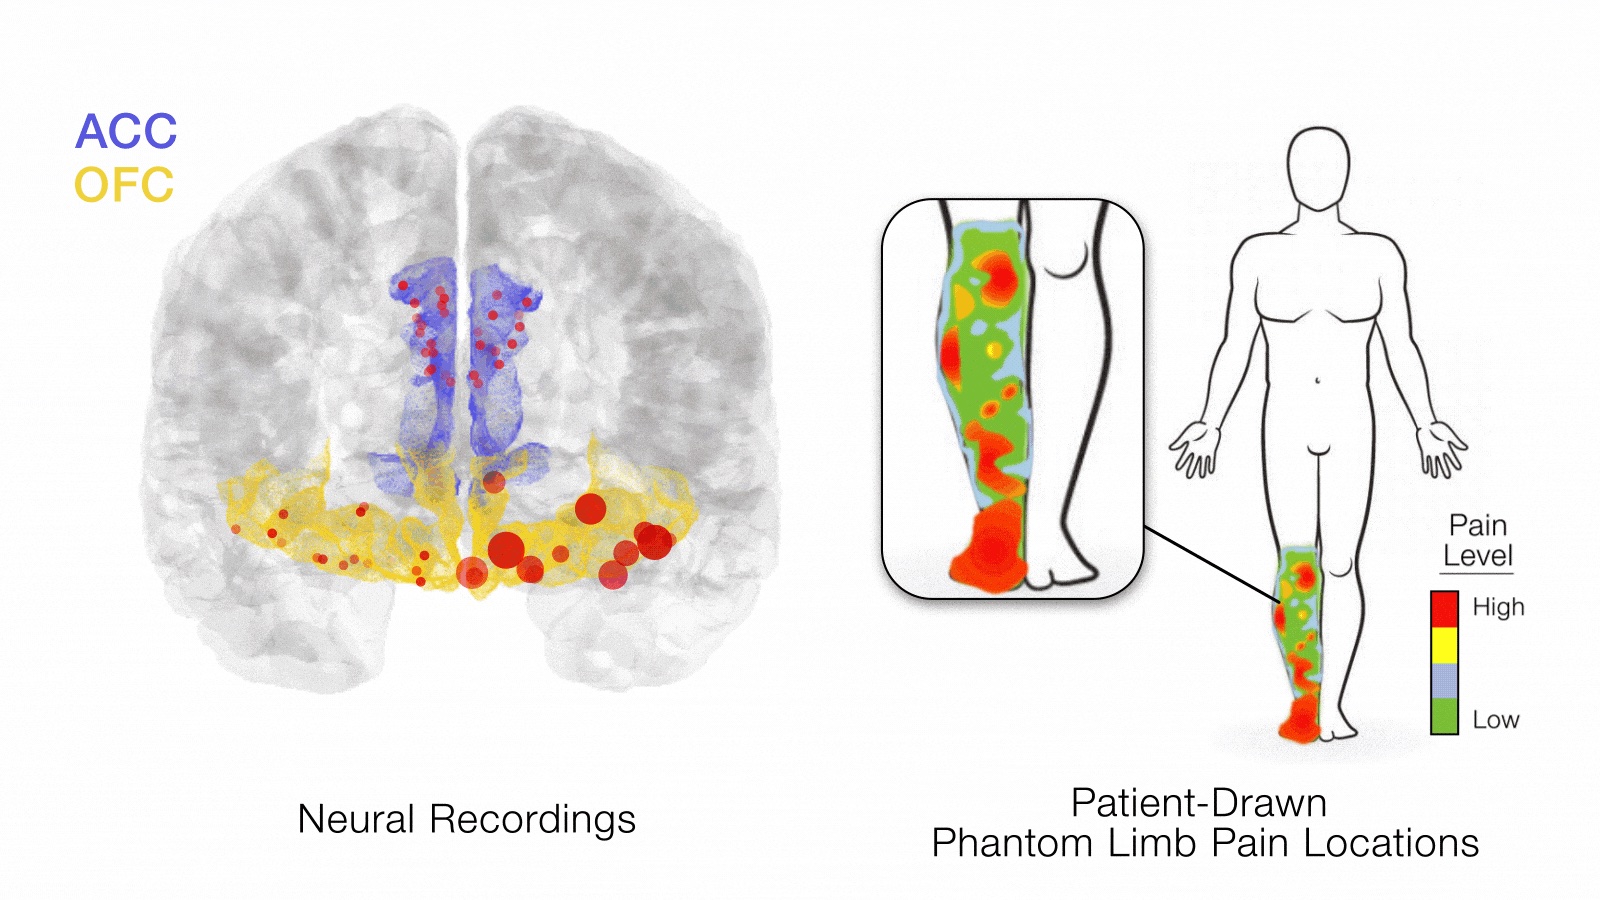 Increased signaling from the orbitofrontal cortexcorrelated with higher pain levels seen on a self-reported pain map from a patient with phantom limb pain